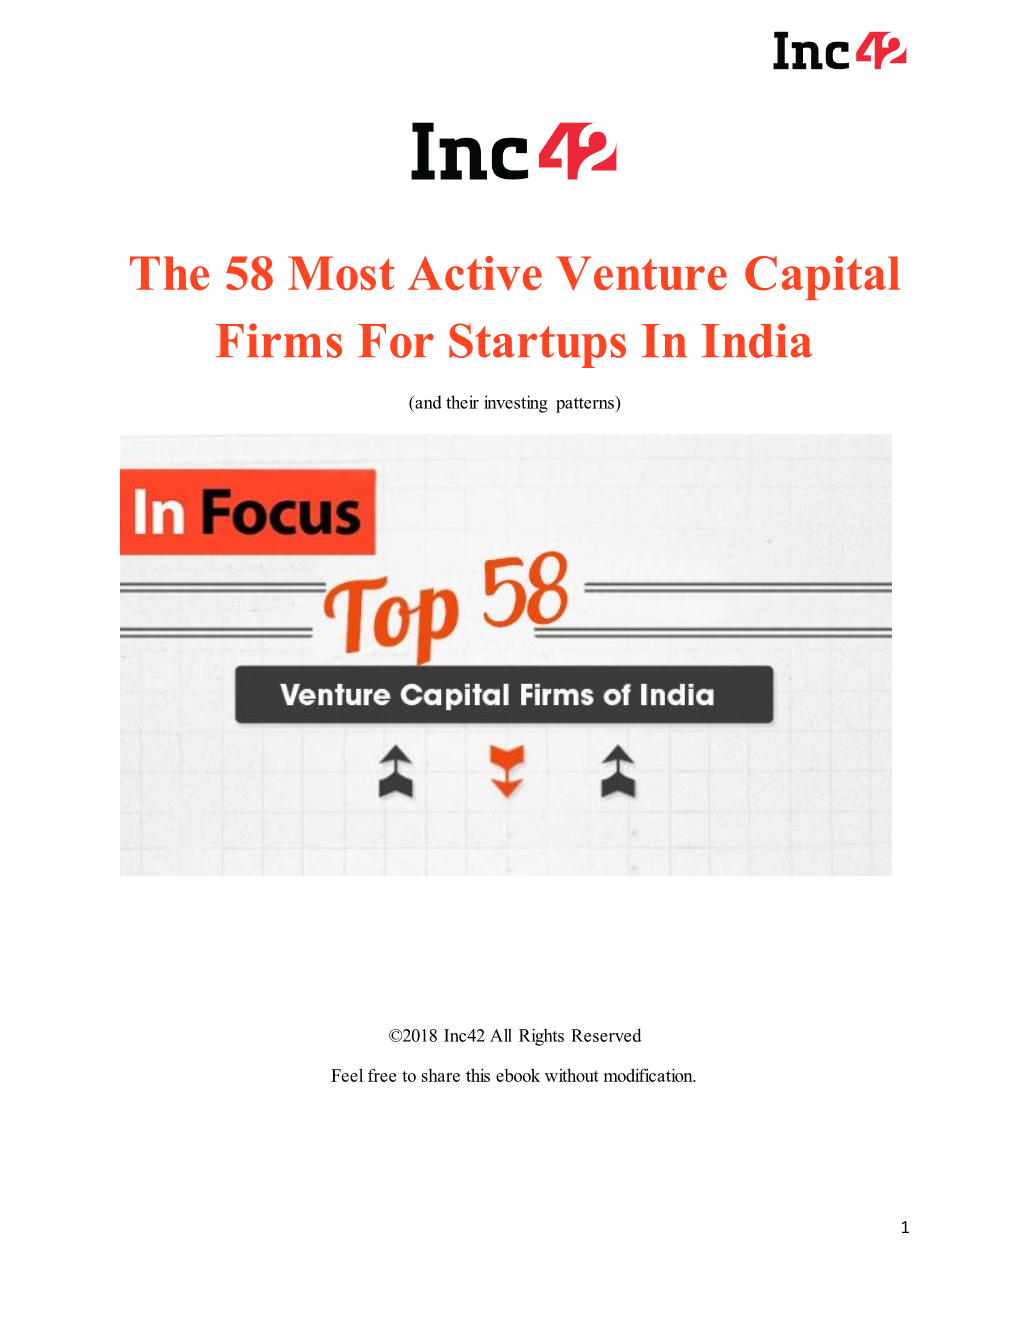 The 58 Most Active Venture Capital Firms for Startups in India